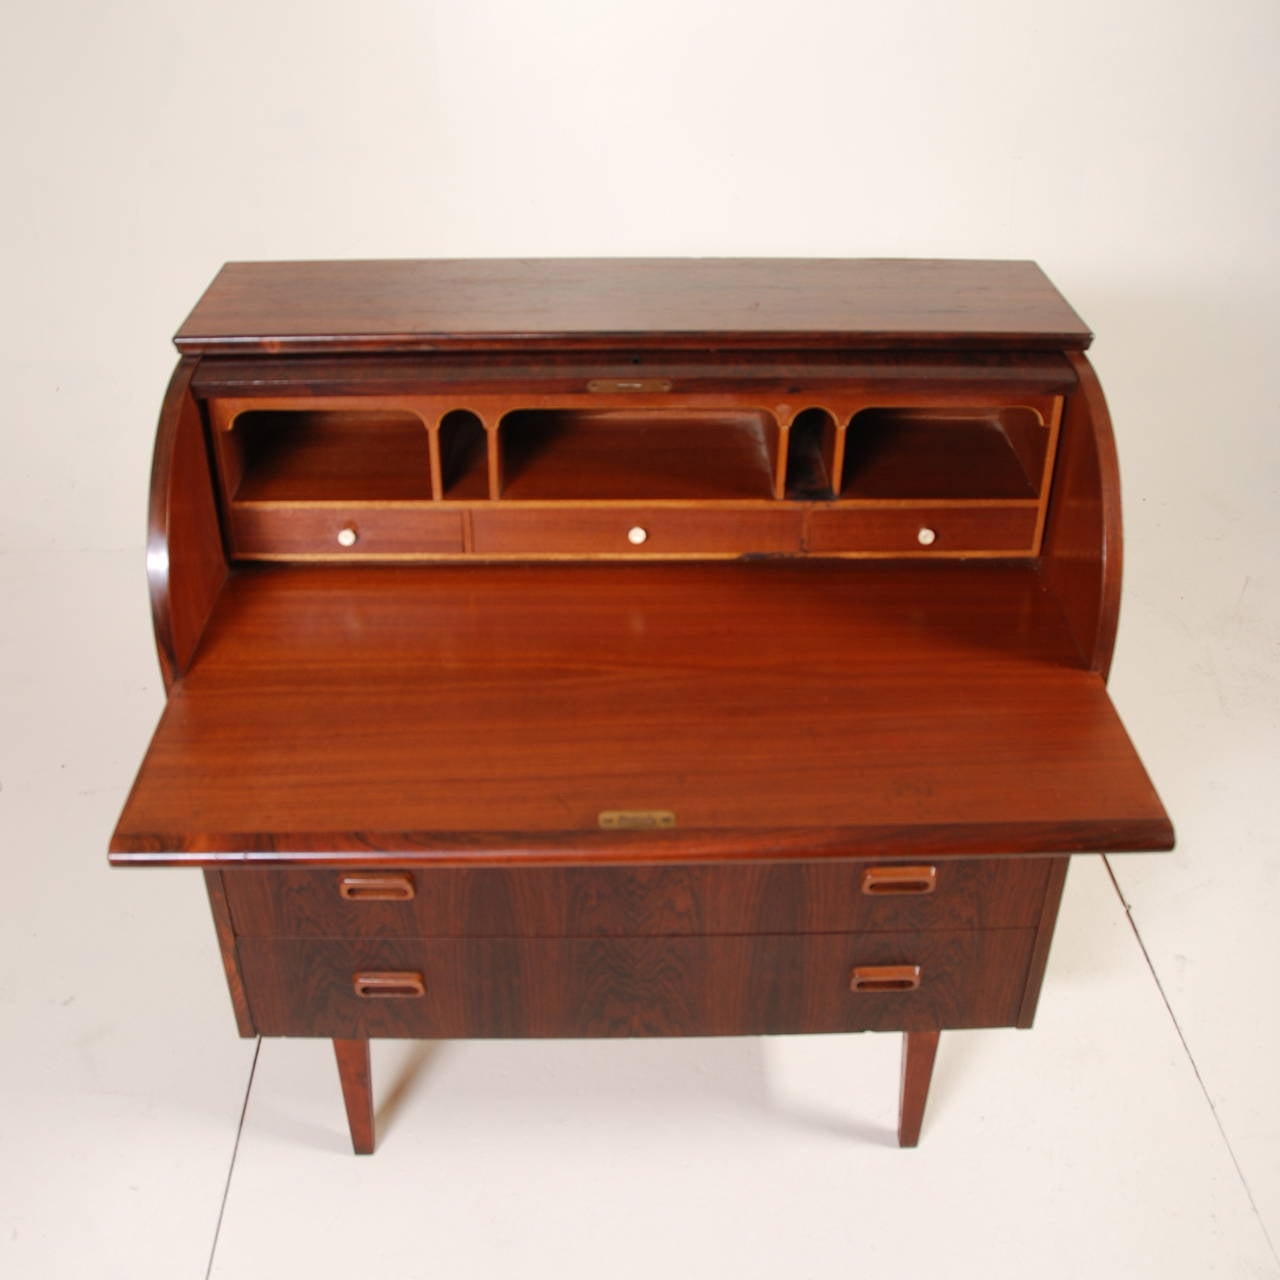 This mid century Swedish modern rosewood desk with a locking roll top is in good vintage condition with minor wear. It includes 3 large storage drawers and multiple cubbies and small drawers. Signed.